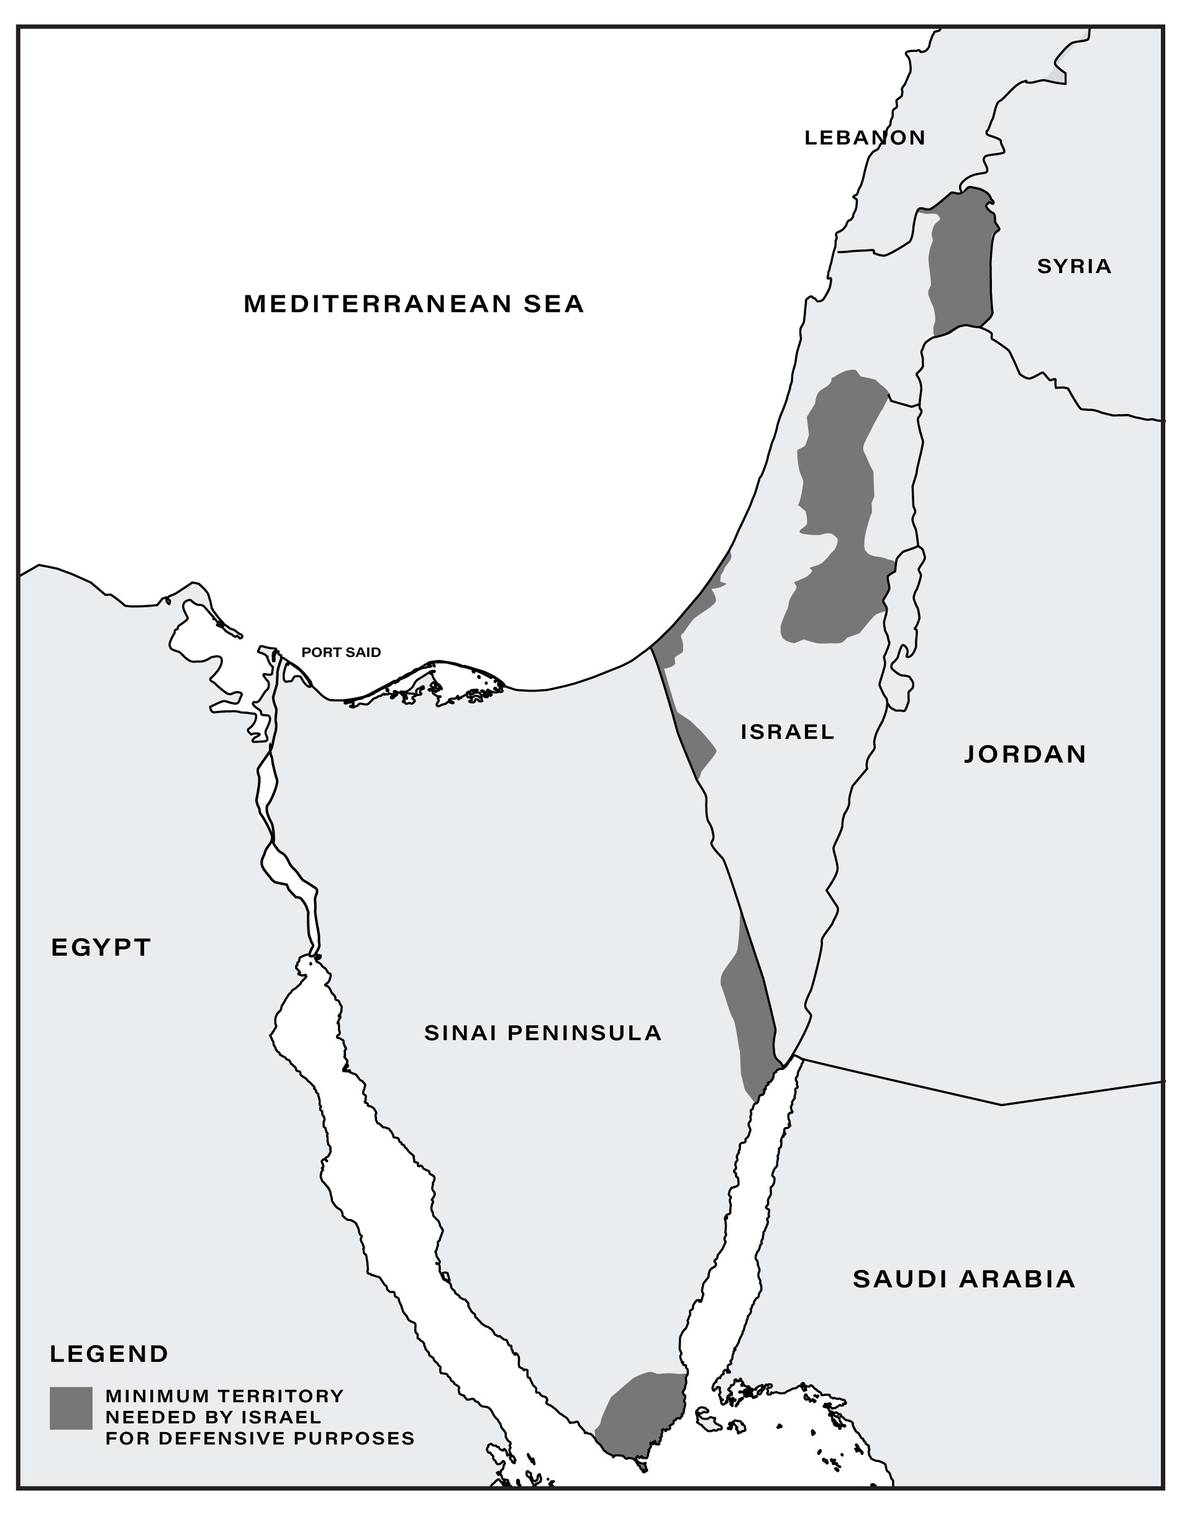 Map from a June 29, 1967, U.S. Joint Chiefs of Staff Memorandum for the secretary of defense (JCSM-373-67) showing 'minimum territory needed by Israel for defensive purposes'